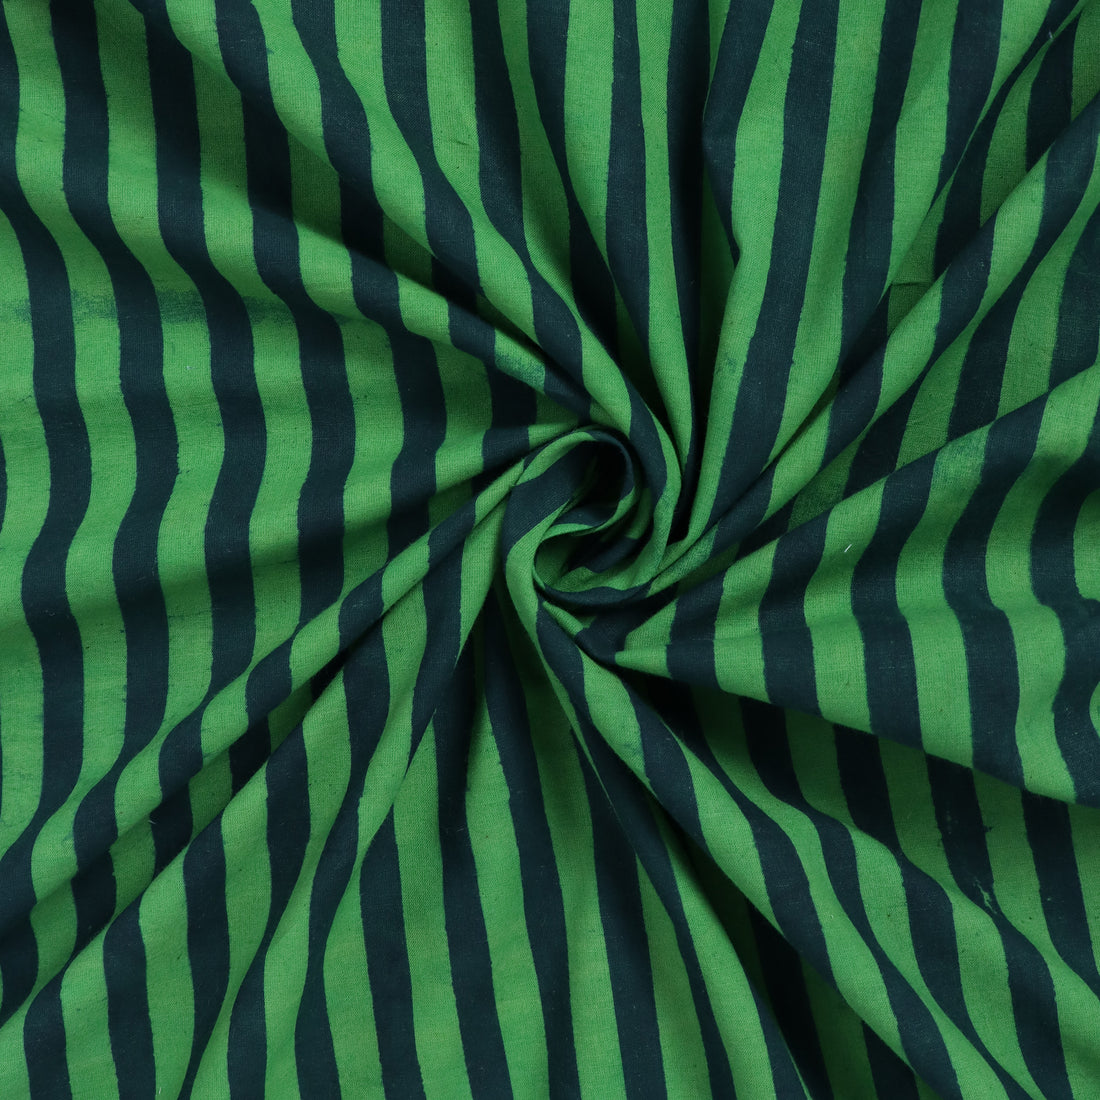 Green Stripes Printed Cotton Running Fabric Online